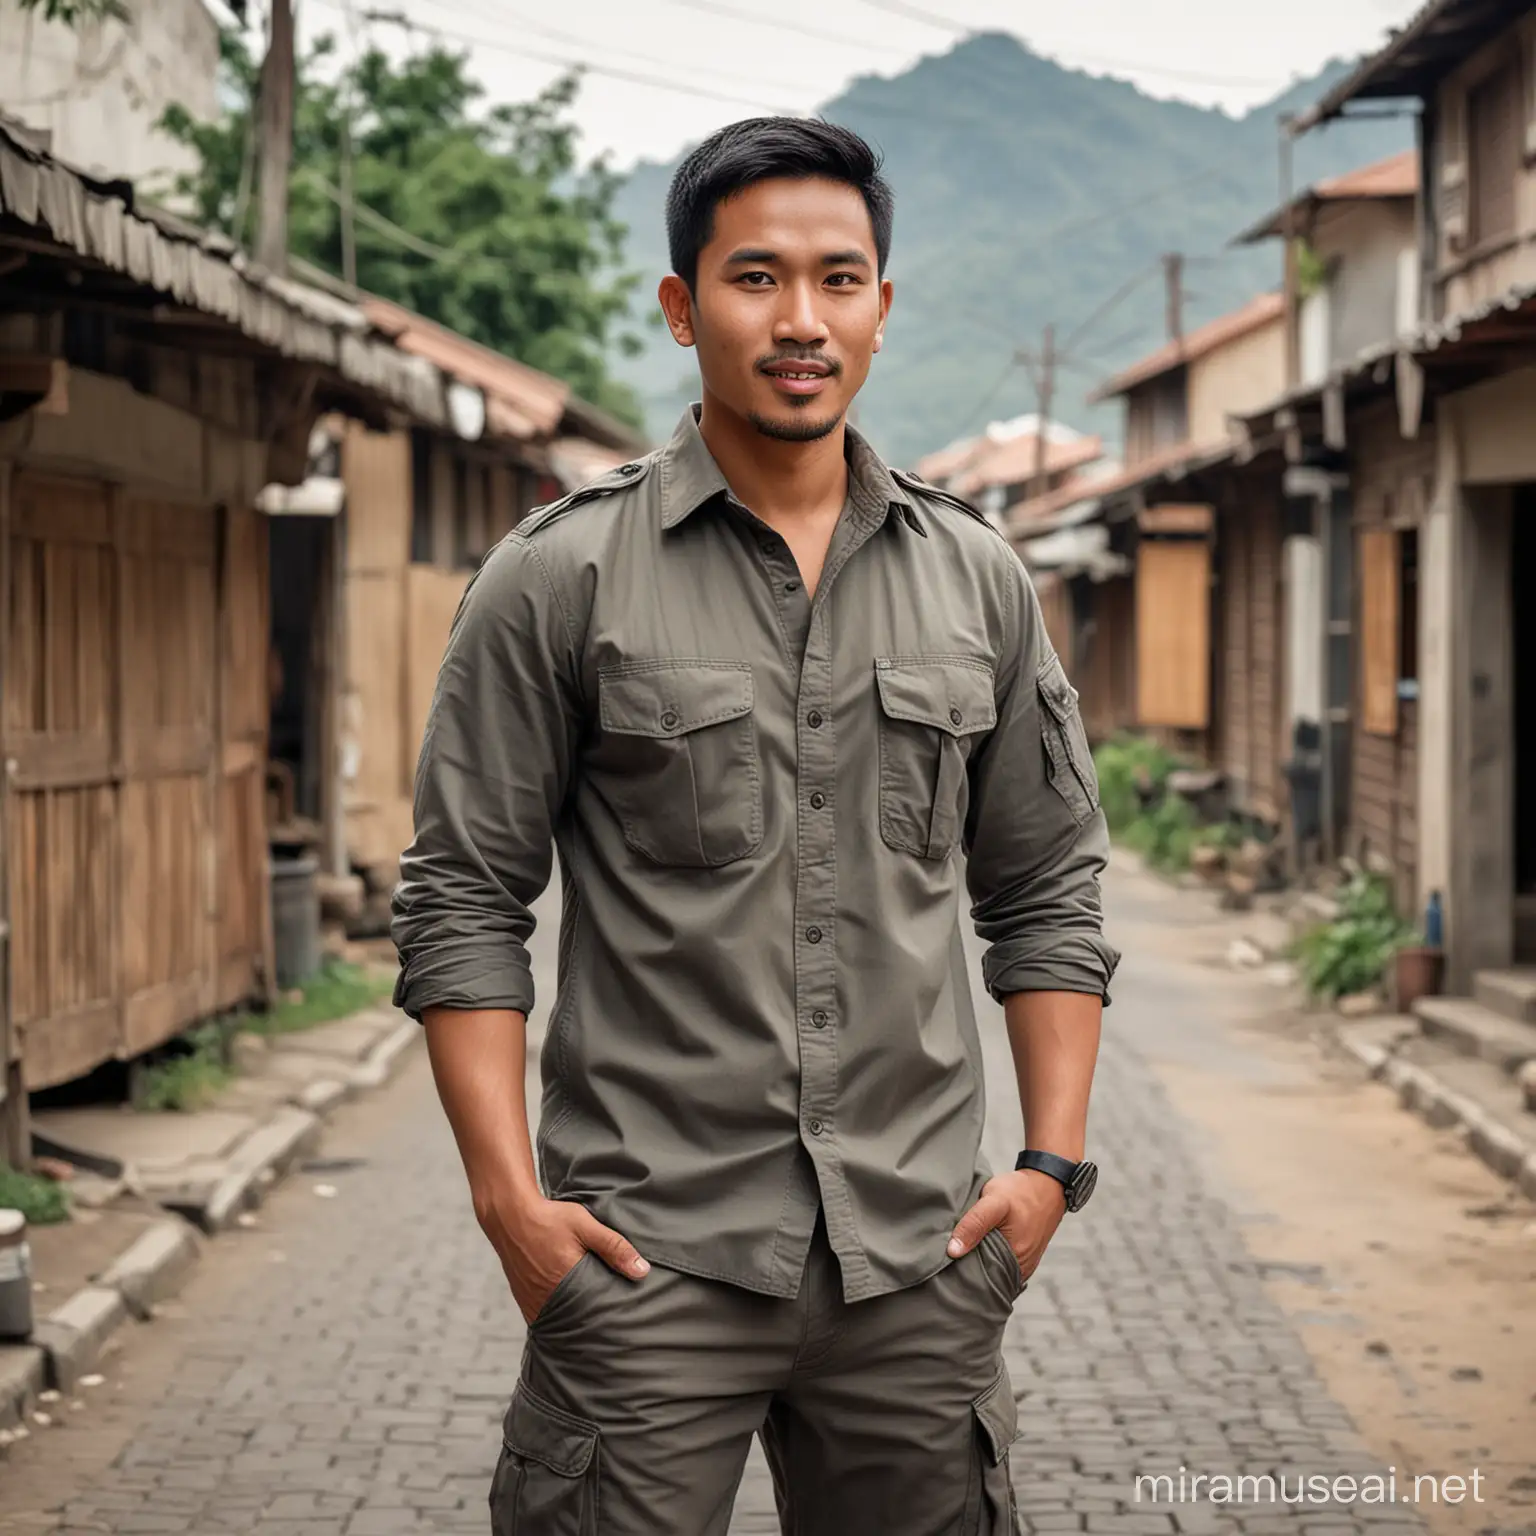 Smiling Indonesian Man in Tactical Attire on Village Street